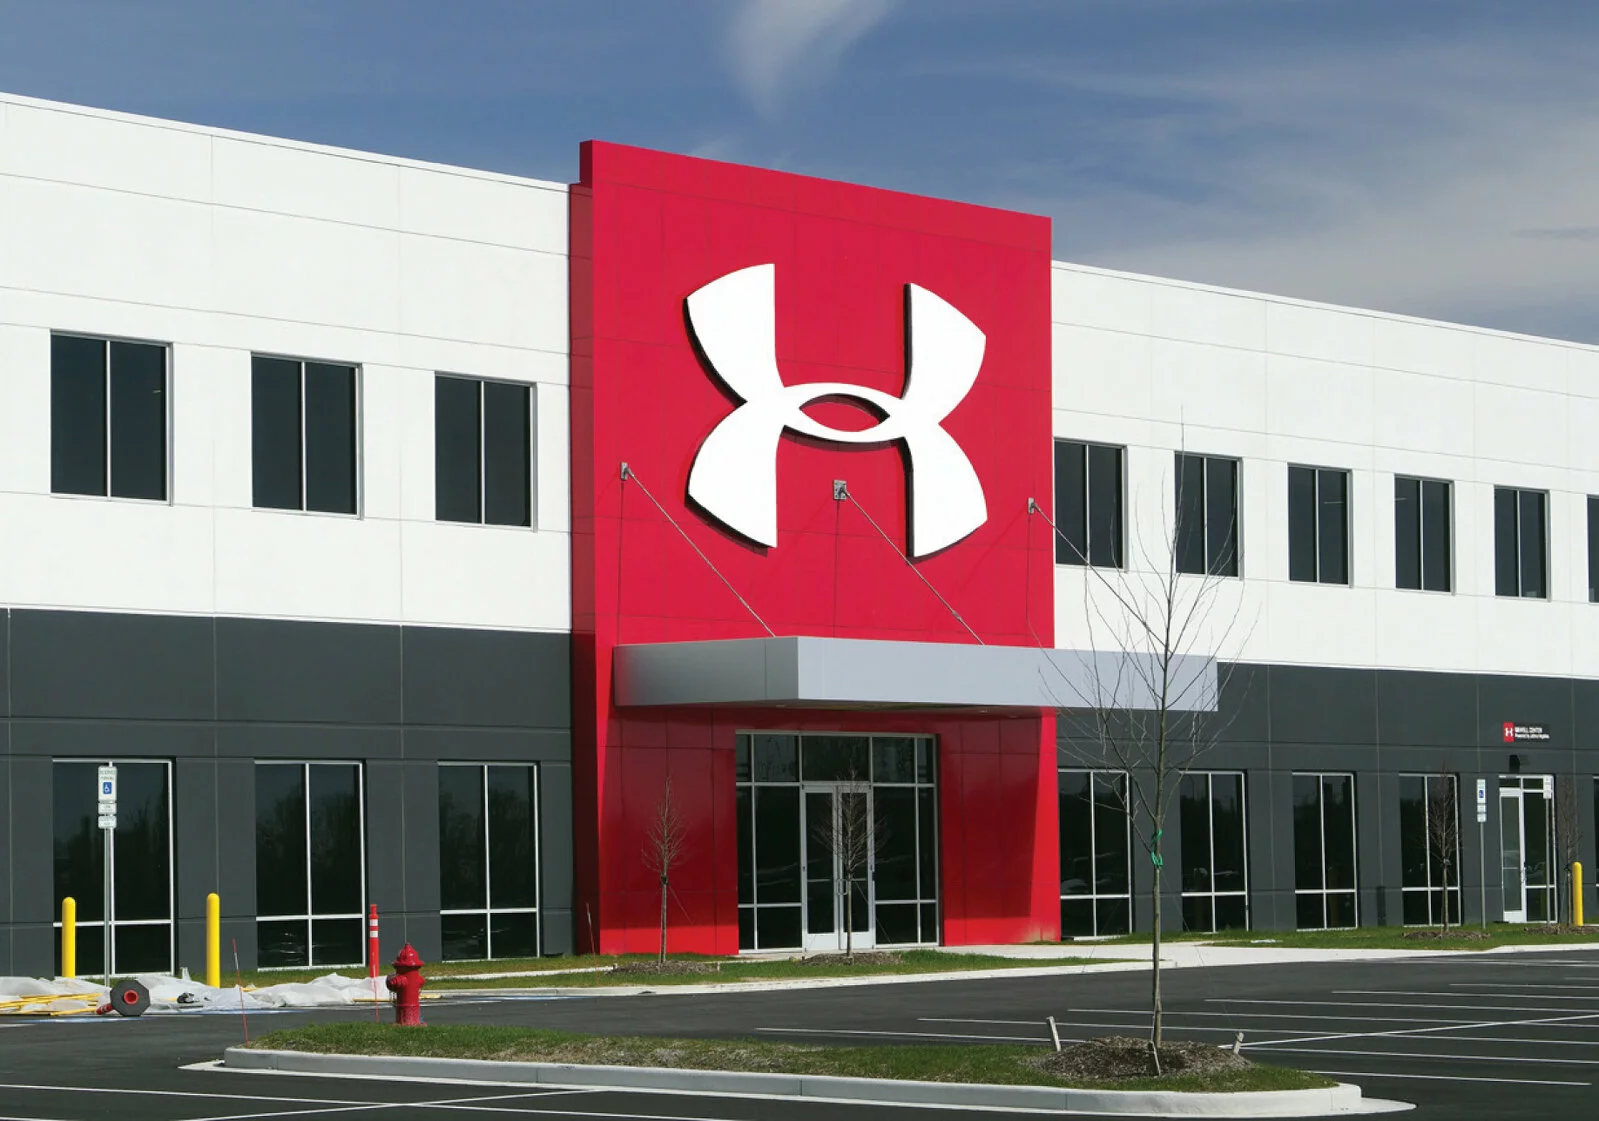 under armour front entrance. large red facade with large under armour signage, parking lot in front.